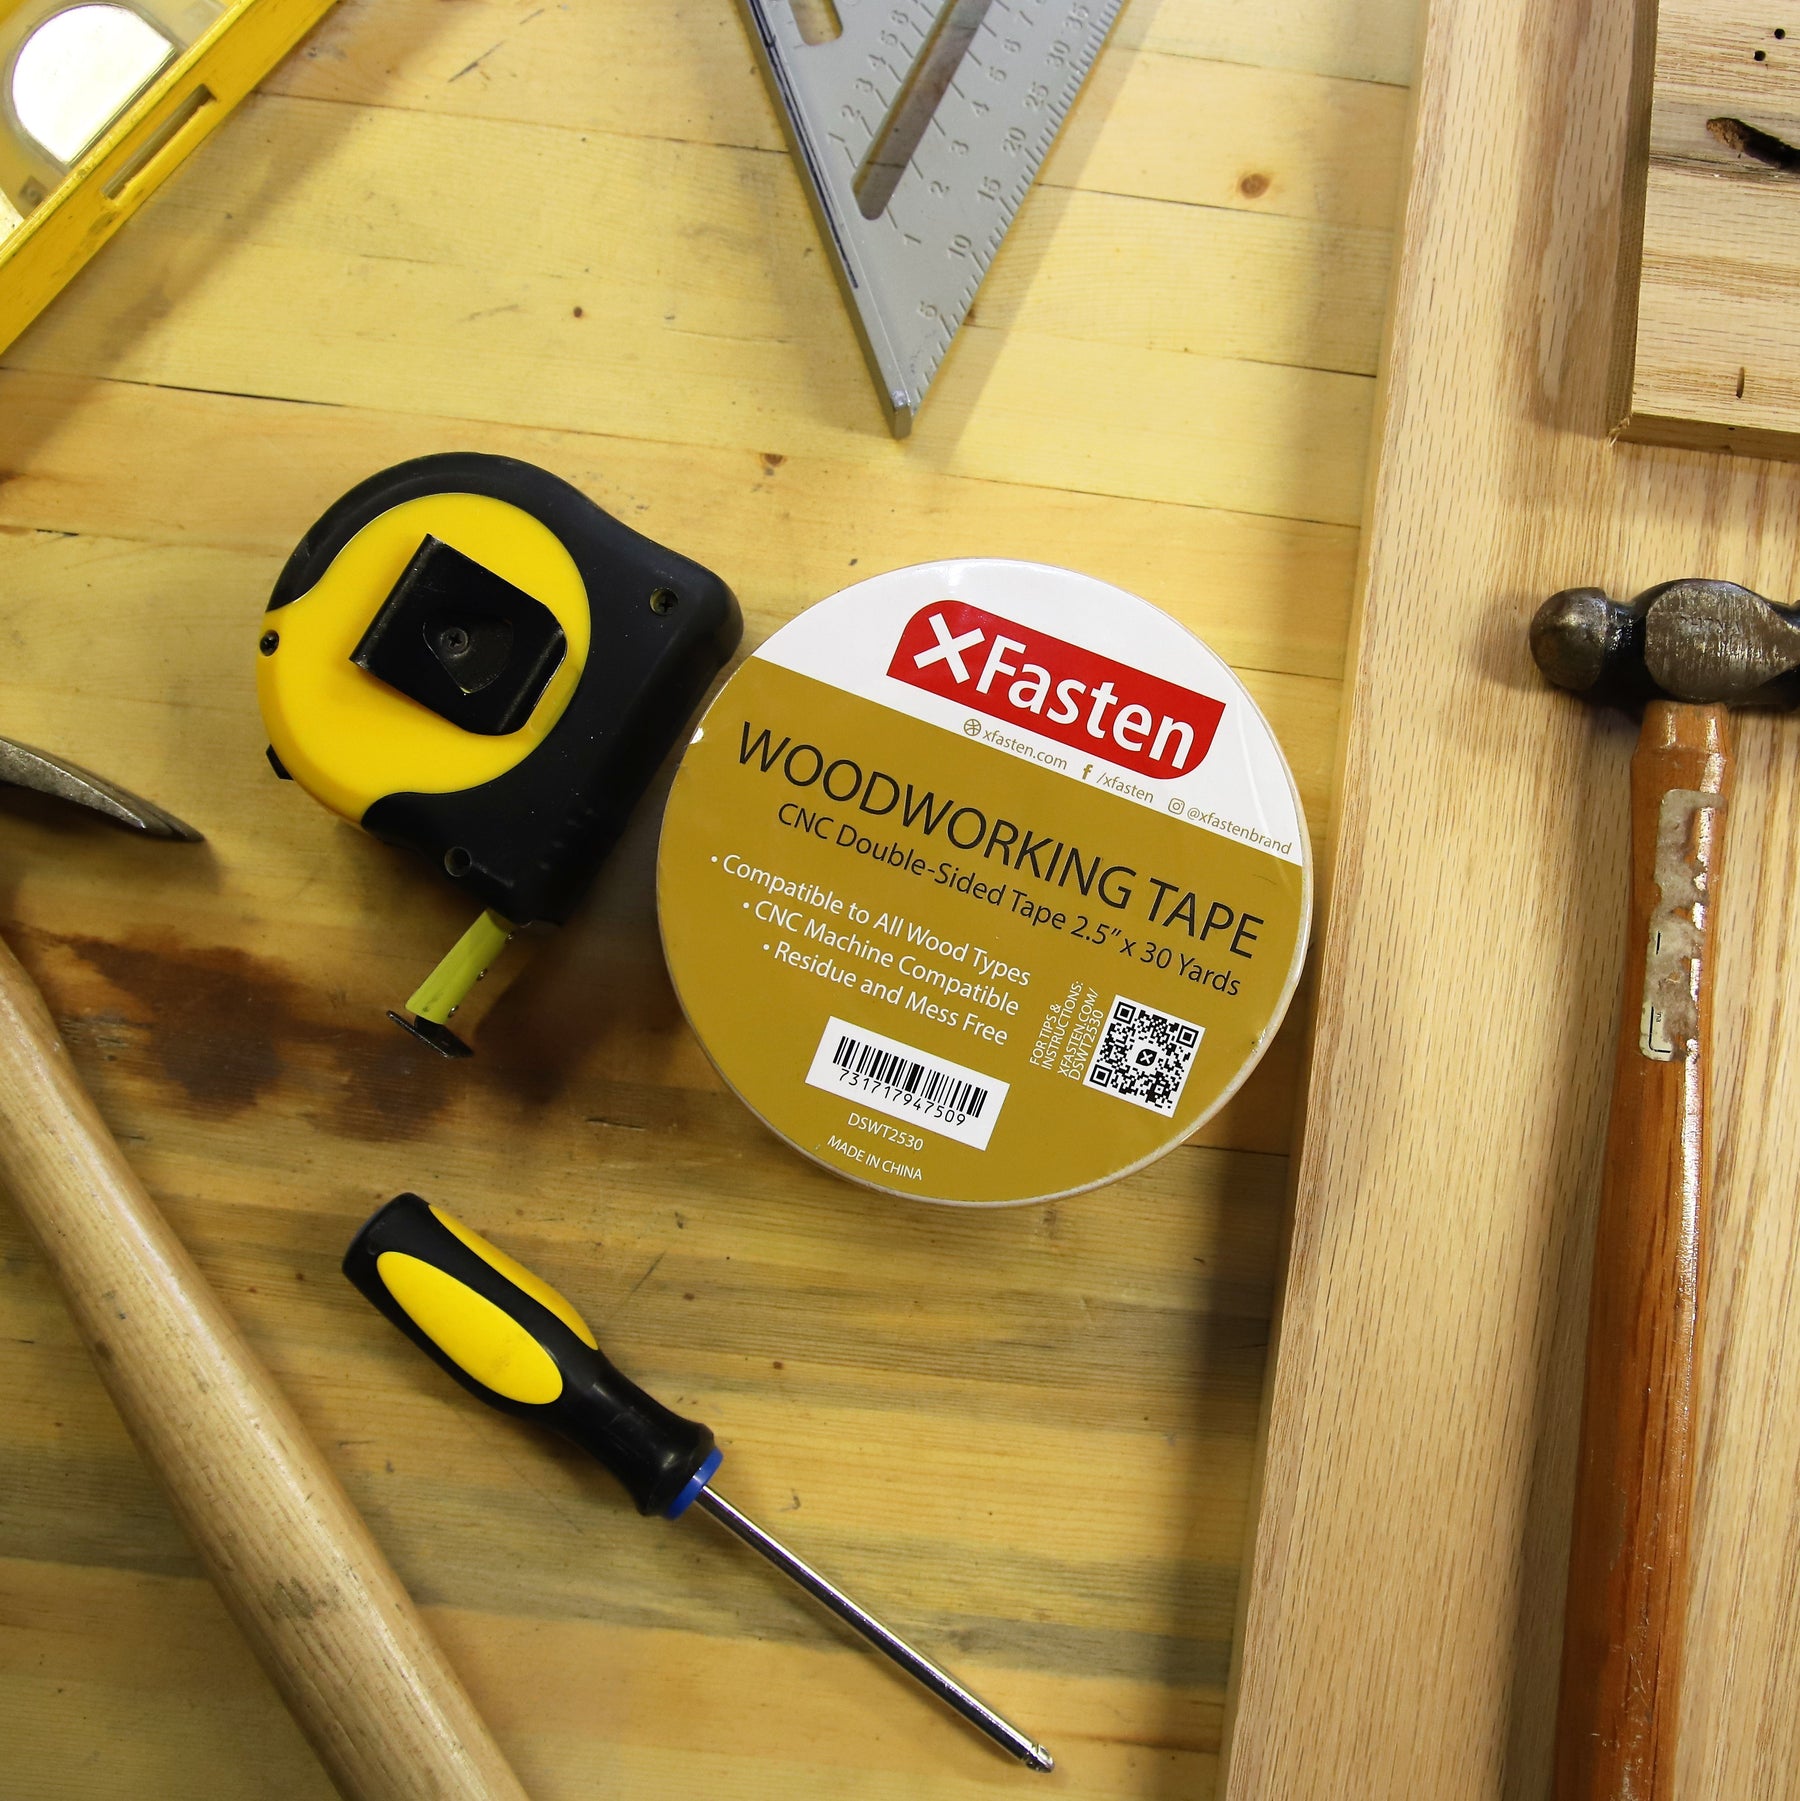 Here's The Best Double Sided Woodworking Tape For Your Masterpieces - XFasten